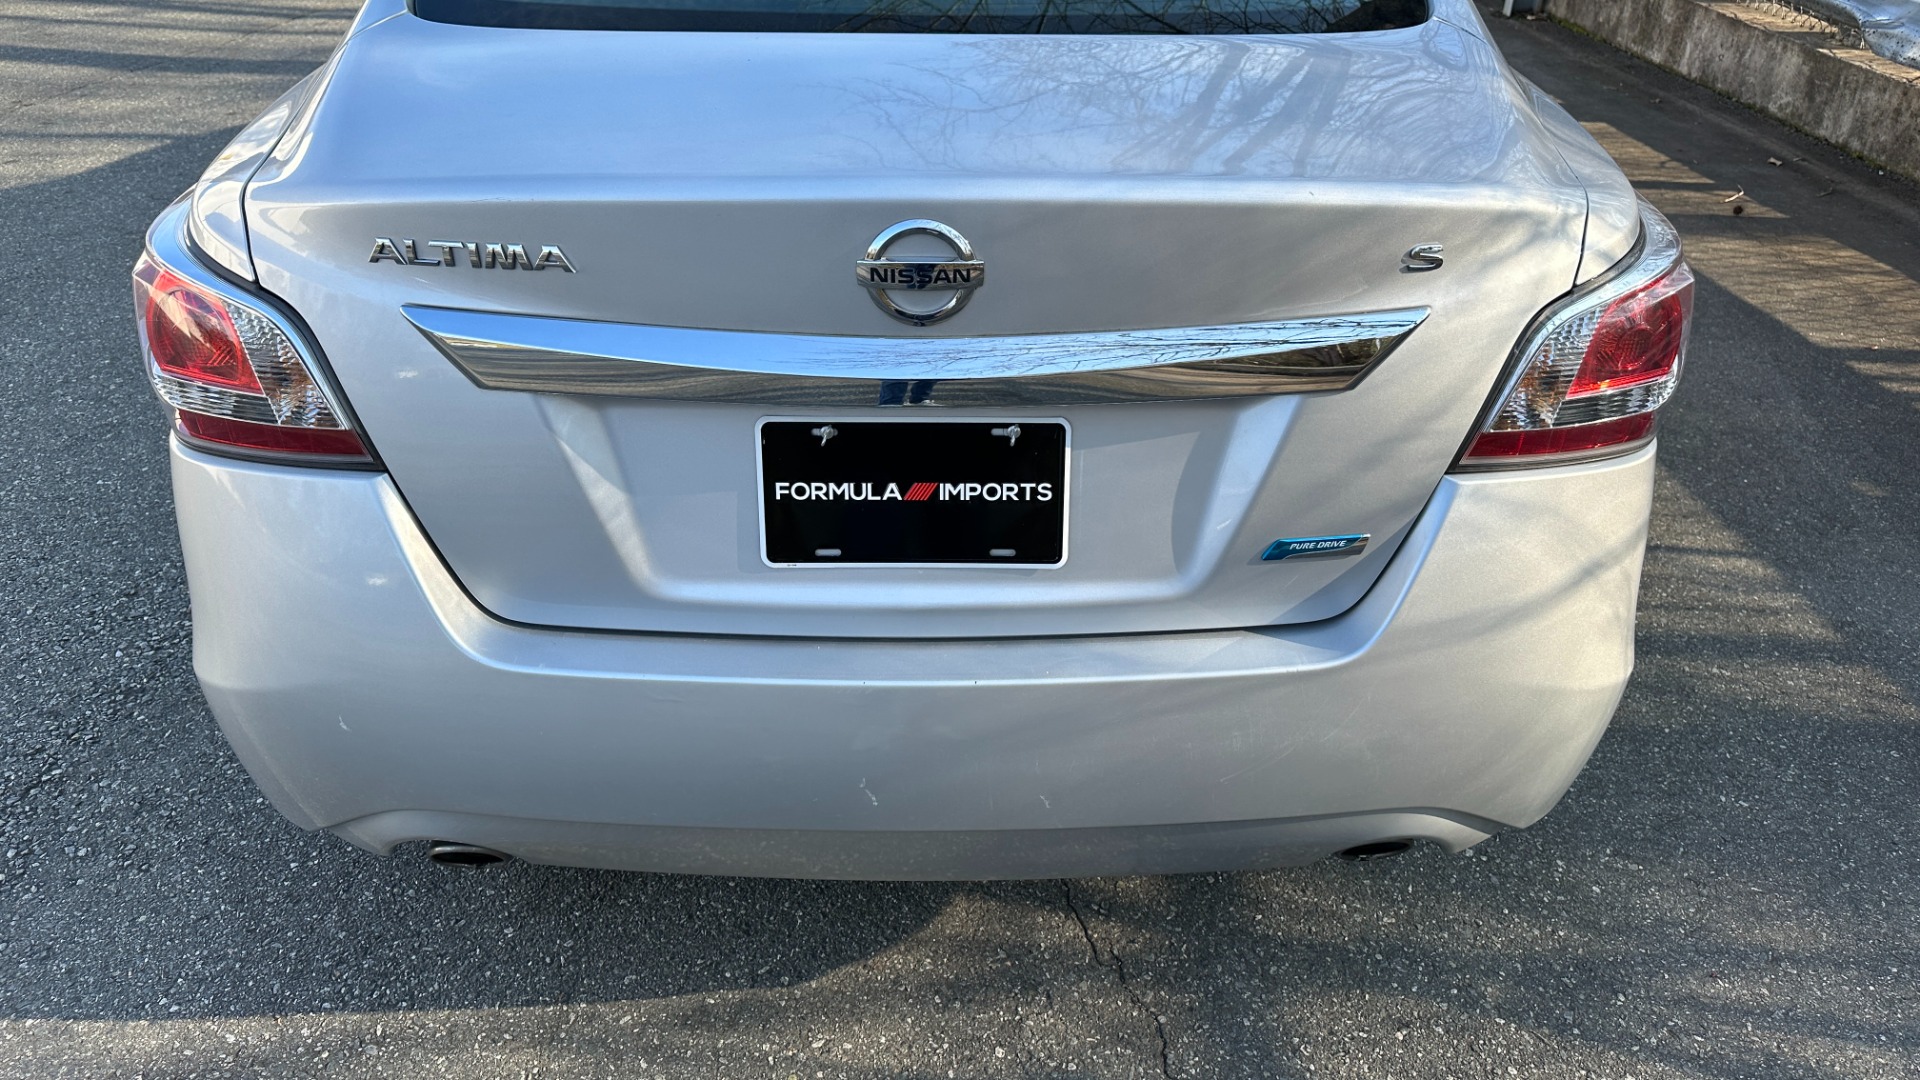 Used 2014 Nissan Altima 2.5 S / CLOTH / 4CYL / BODY SIDE MOLDING / RADIO for sale Sold at Formula Imports in Charlotte NC 28227 8